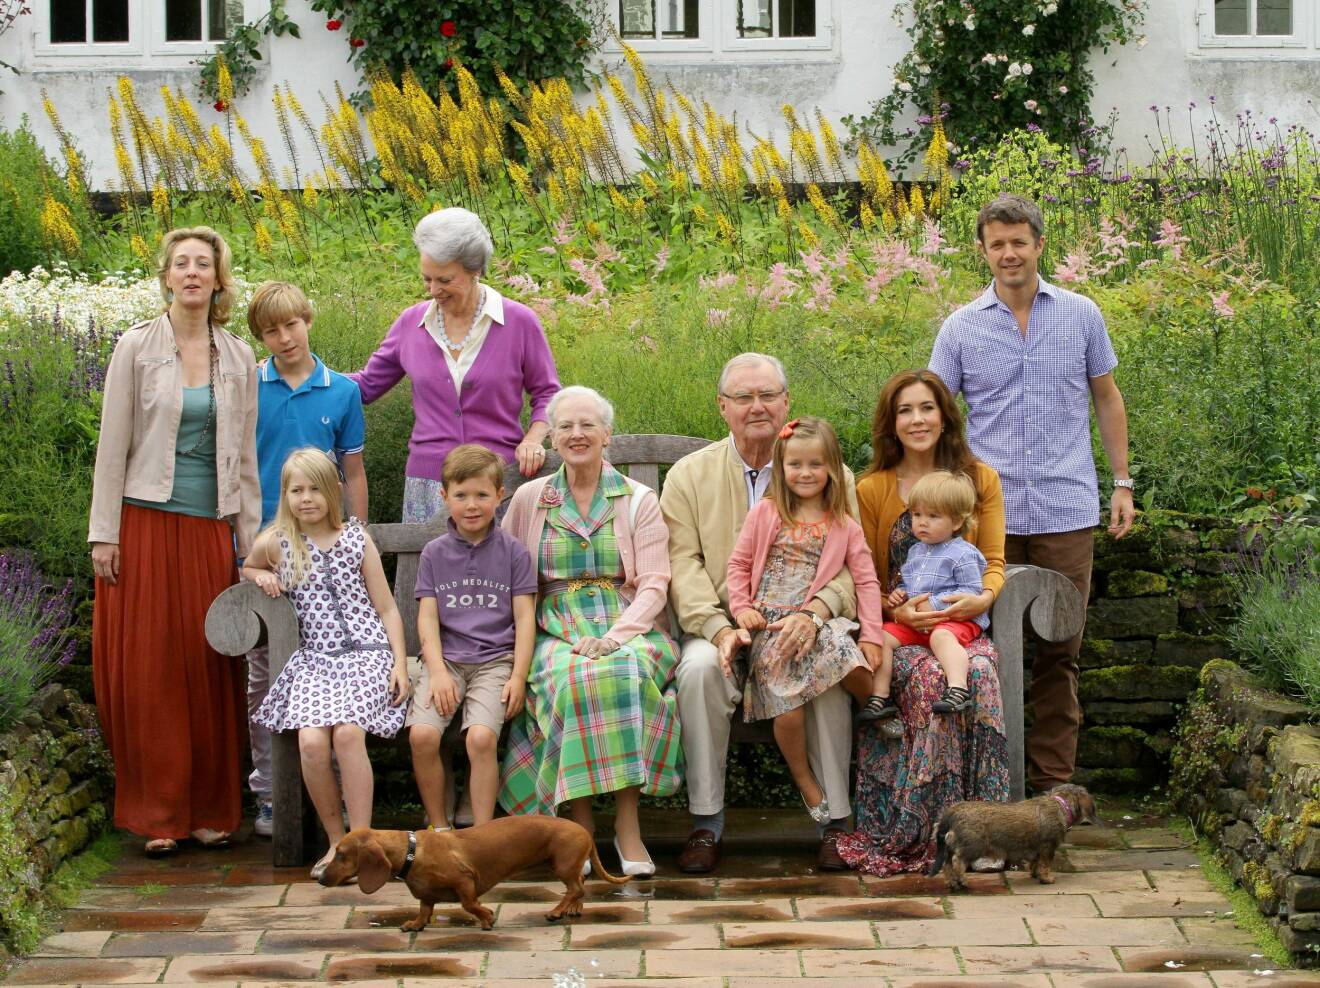 (Front, L-R) Countess Ingrid, Prince Christian, Queen Margrethe, Prince Henrik, Princess Isabella, Crownprincess Mary, Prince Vincent and Crown Prince Frederik, (Back, L-R) Princess Alexandra, Count Friedrich Richard and Princess Benedikte pose for the media at the annual photo session at Grasten Palace in Grasten, Denmark, 20 July 2012. Due to sickness Princess Jospehine could not attend the photo session. Photo: Albert Nieboer / RPE NETHERLANDS OUT (c) DPA / IBL Bildbyrå